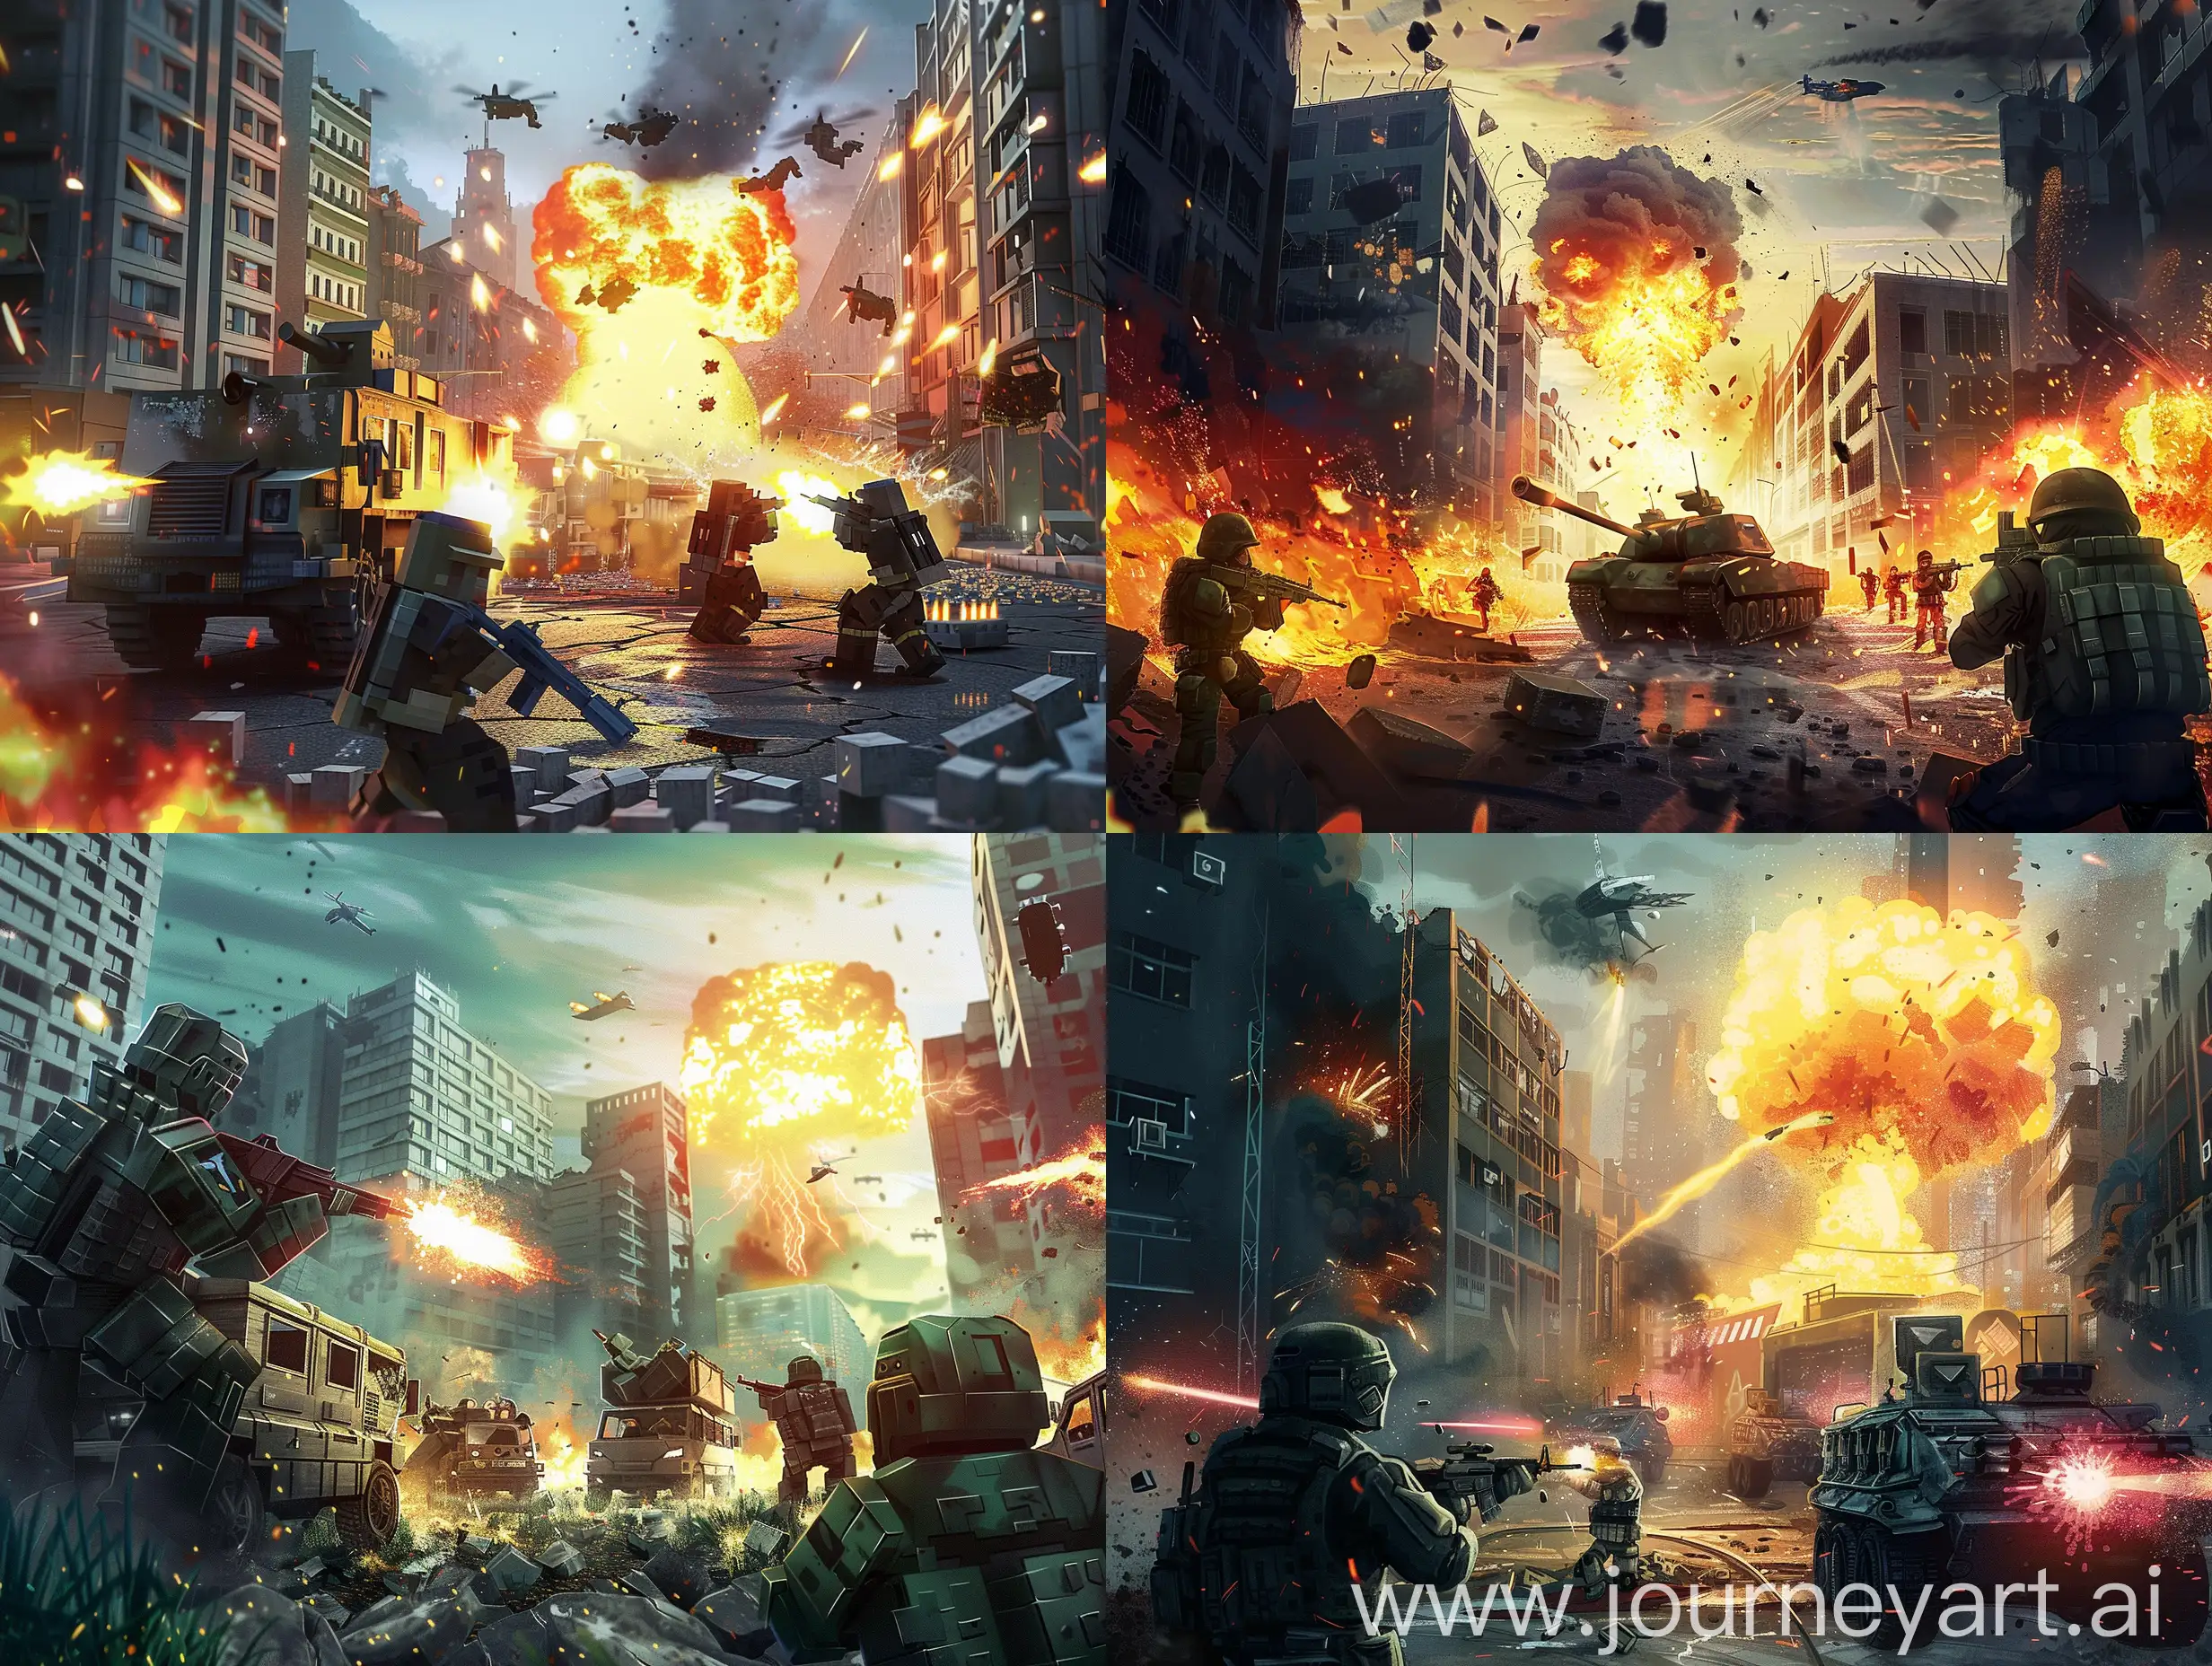 Urban-Battle-Scene-with-Soldiers-and-Atomic-Explosion